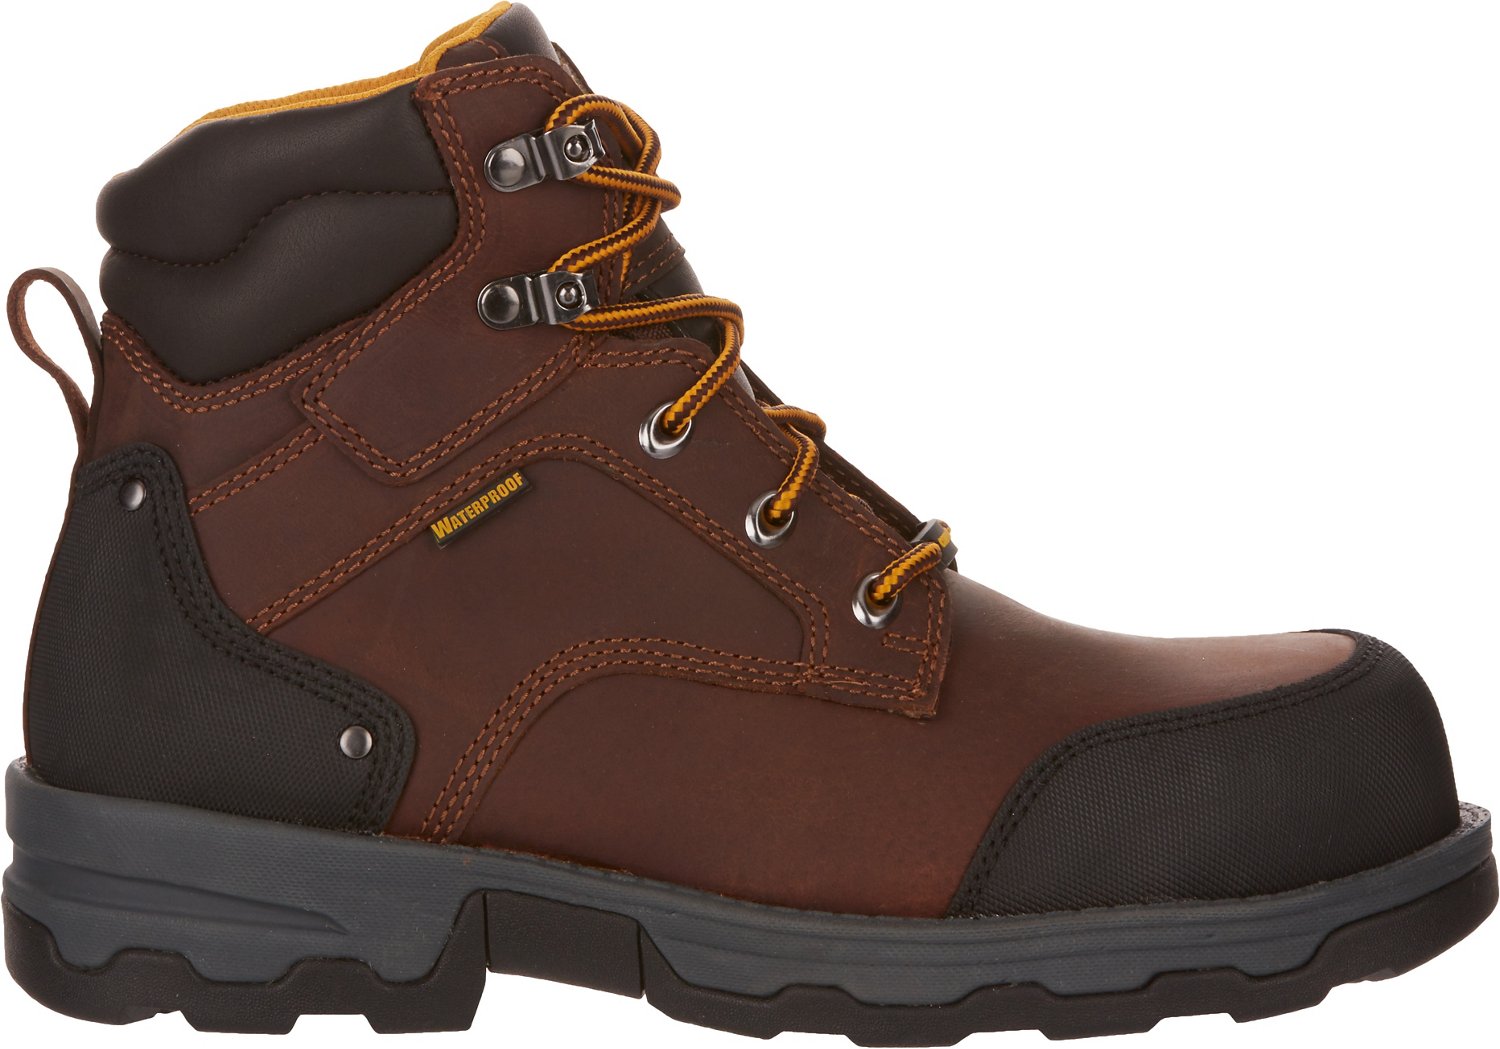 Brazos Men's Workhorse 3.0 EH Composite Toe Lace Up Work Boots                                                                   - view number 1 selected